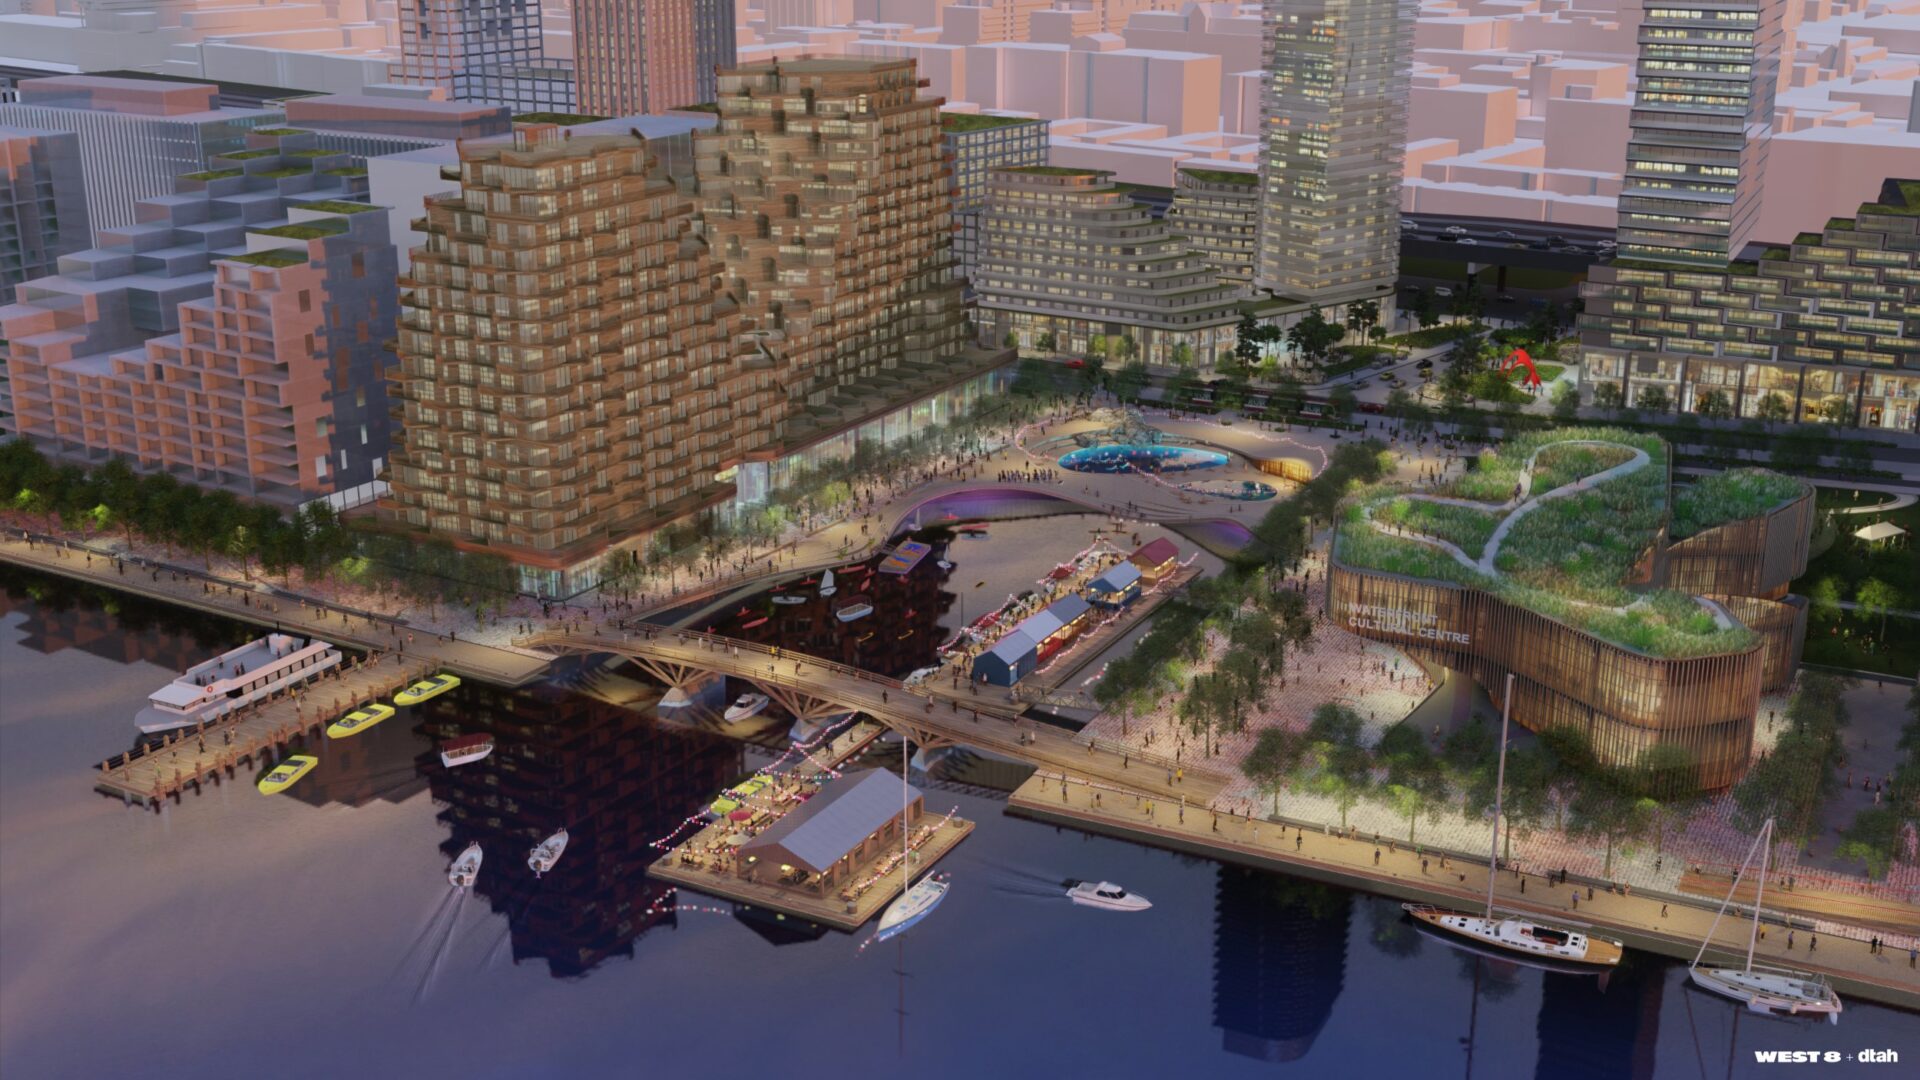 Rendering of a public space on the waterfront by night